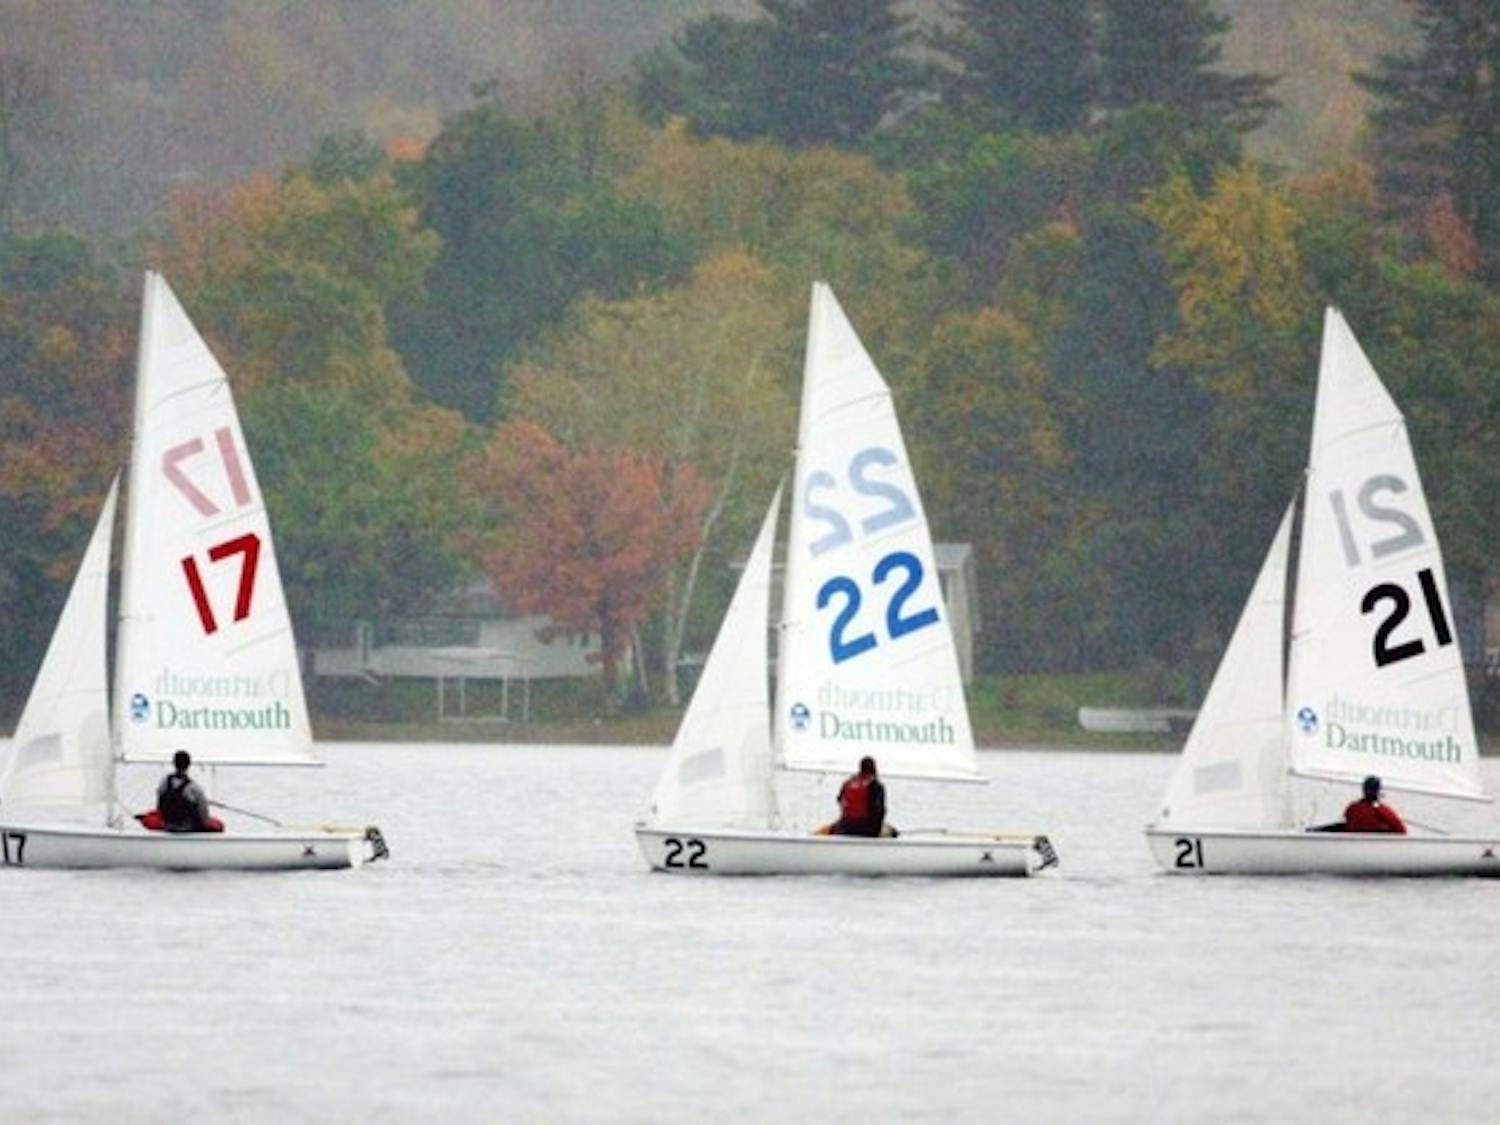 After a relaxing weekend at MIT, the sailing team will next head to Brown for the New England Championships.